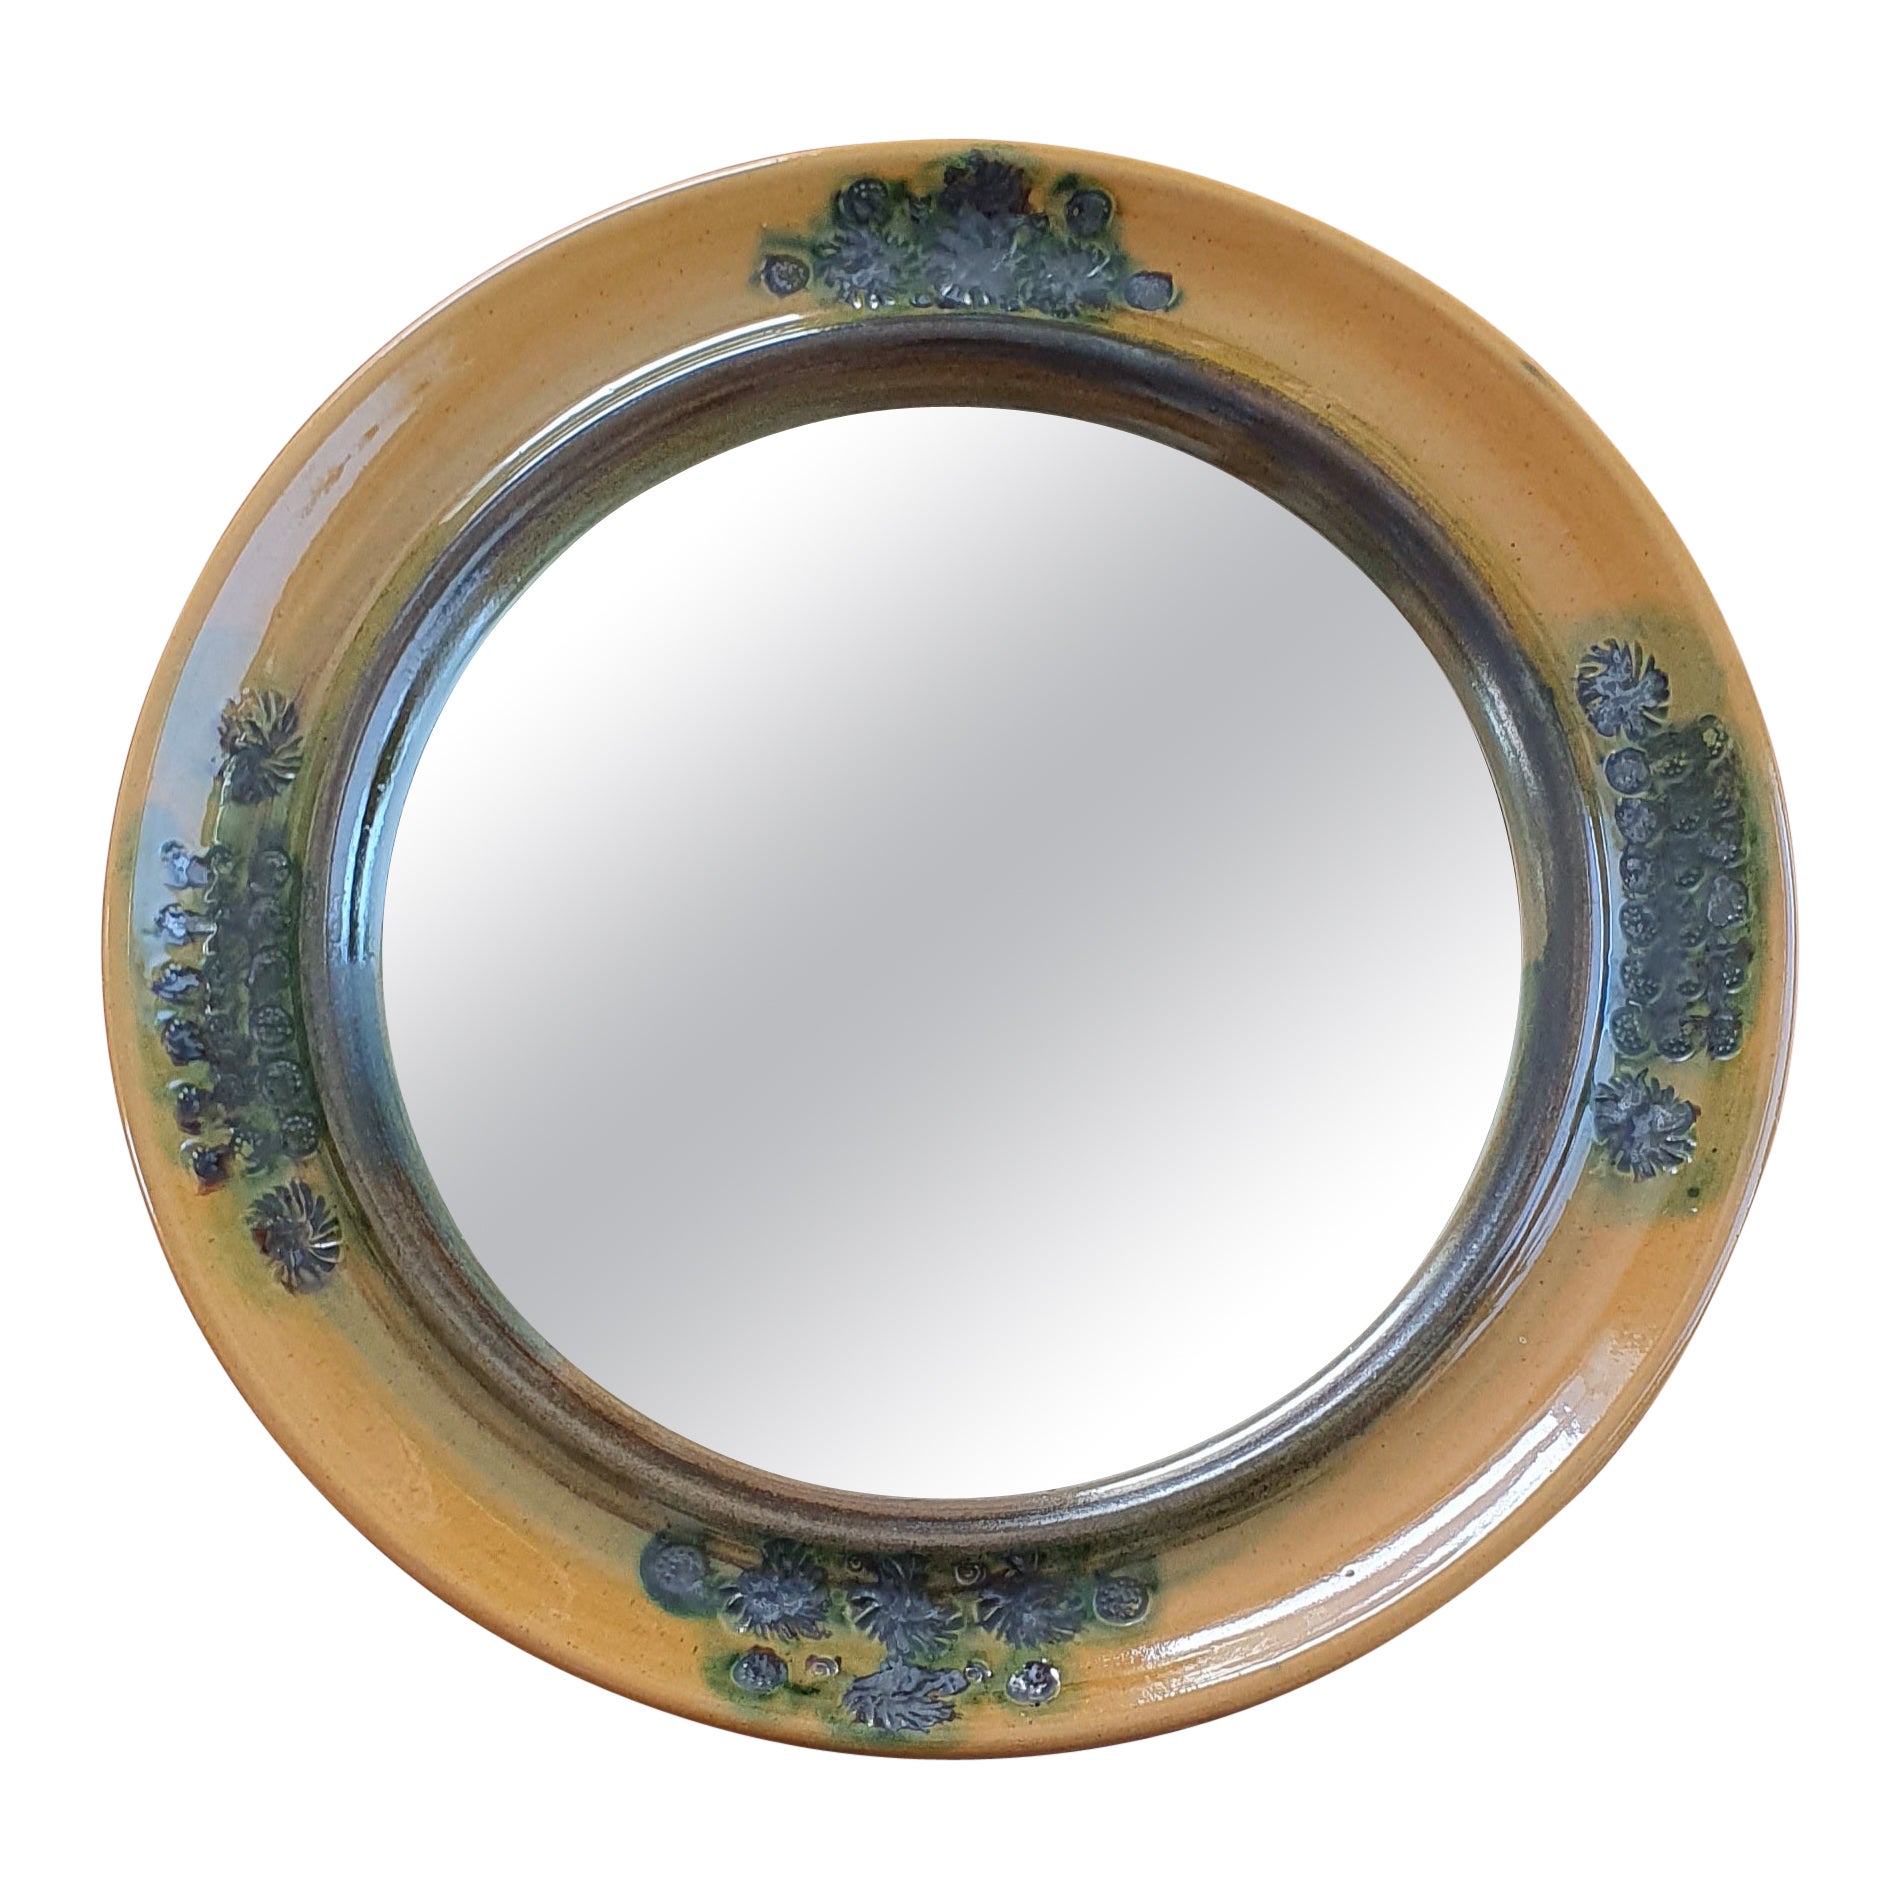 Midcentury Circular Wall Mirror by Hanne Salamon, 1960s For Sale